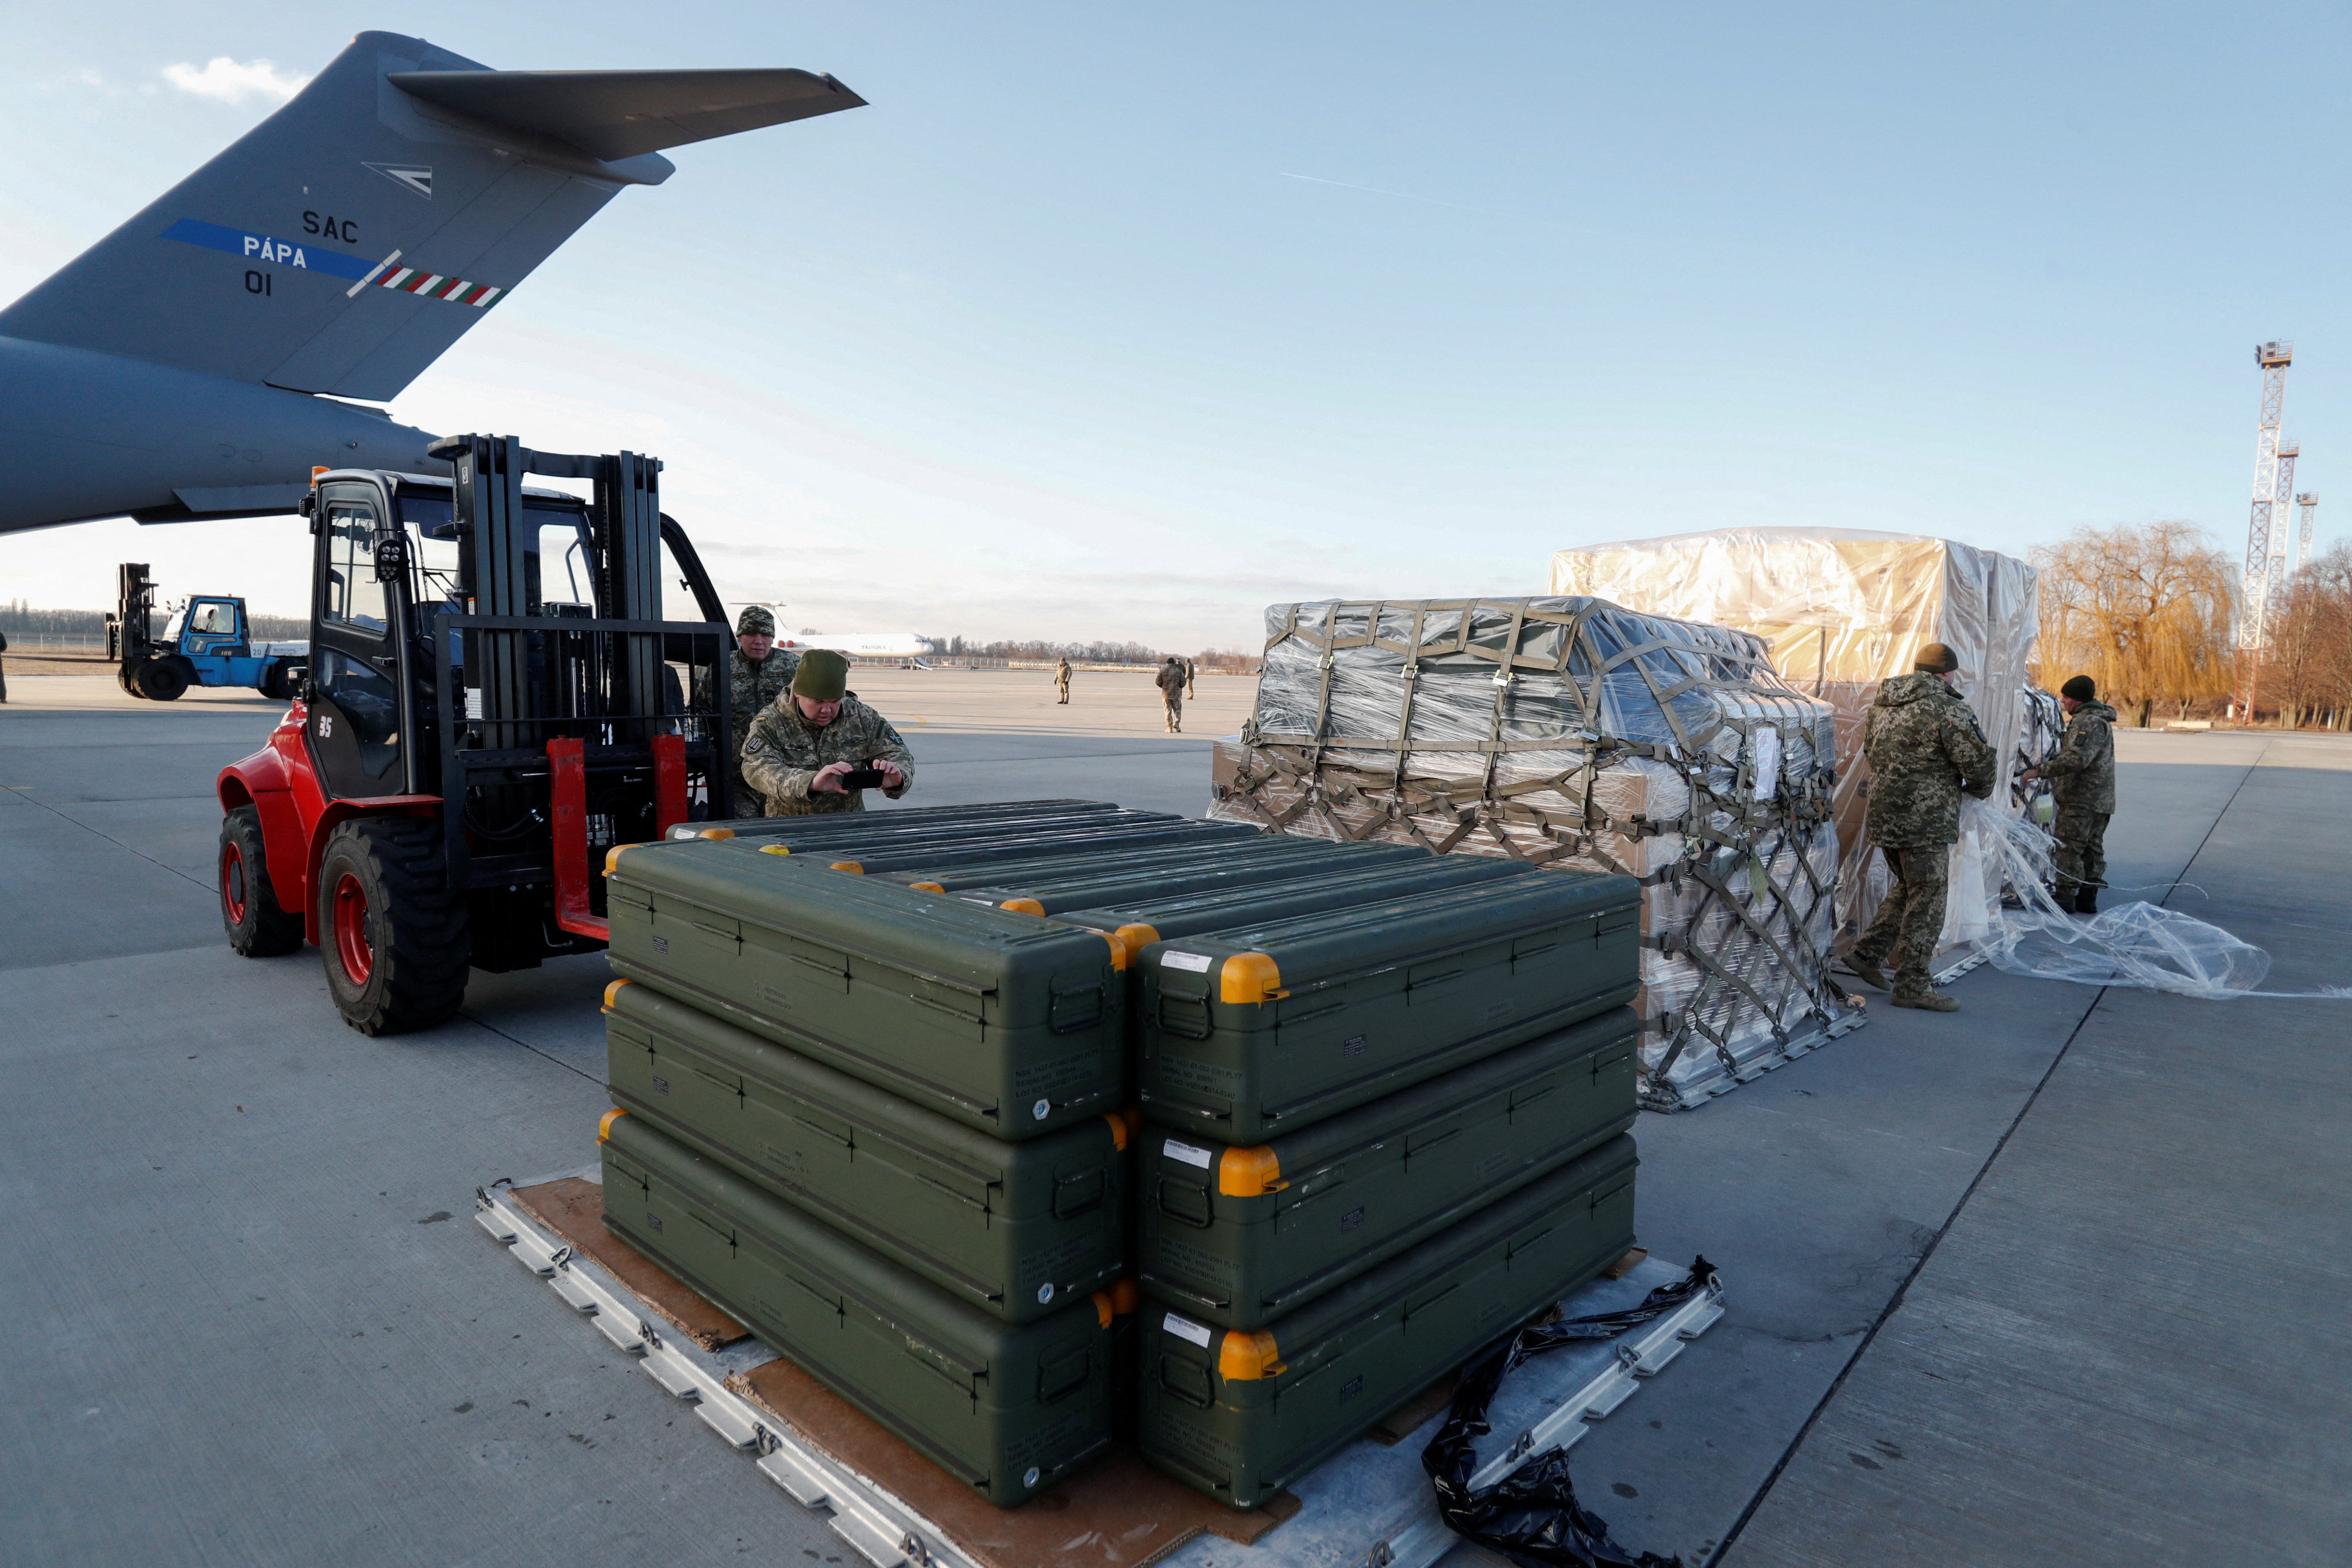 Ukraine receives shipment of Lithuania's military aid at an airport outside Kyiv